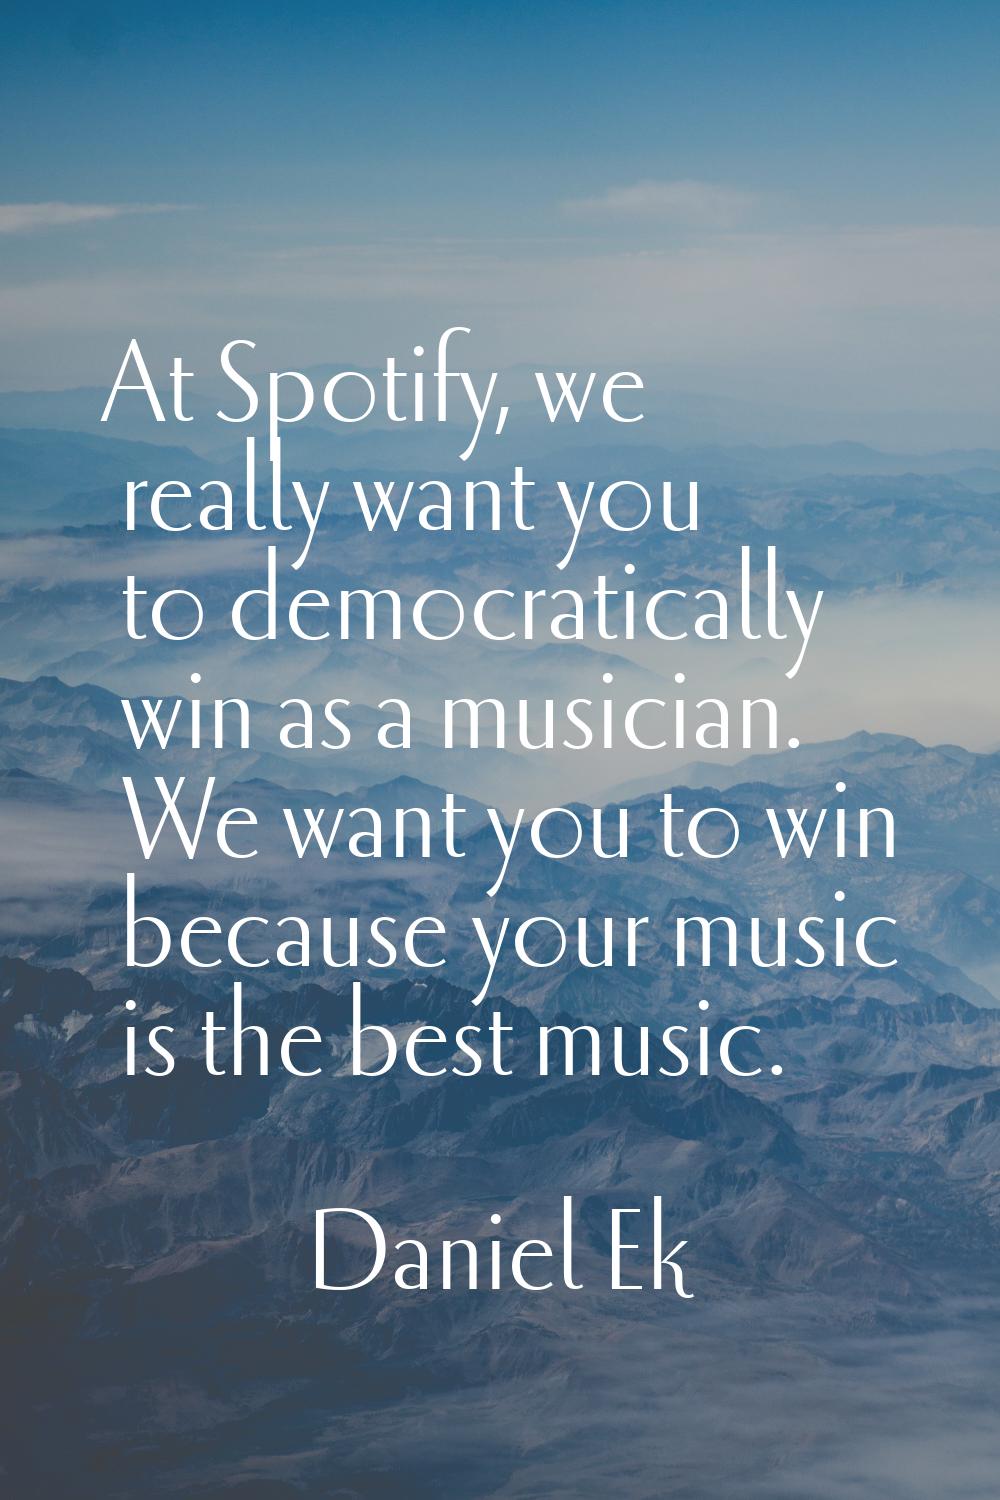 At Spotify, we really want you to democratically win as a musician. We want you to win because your